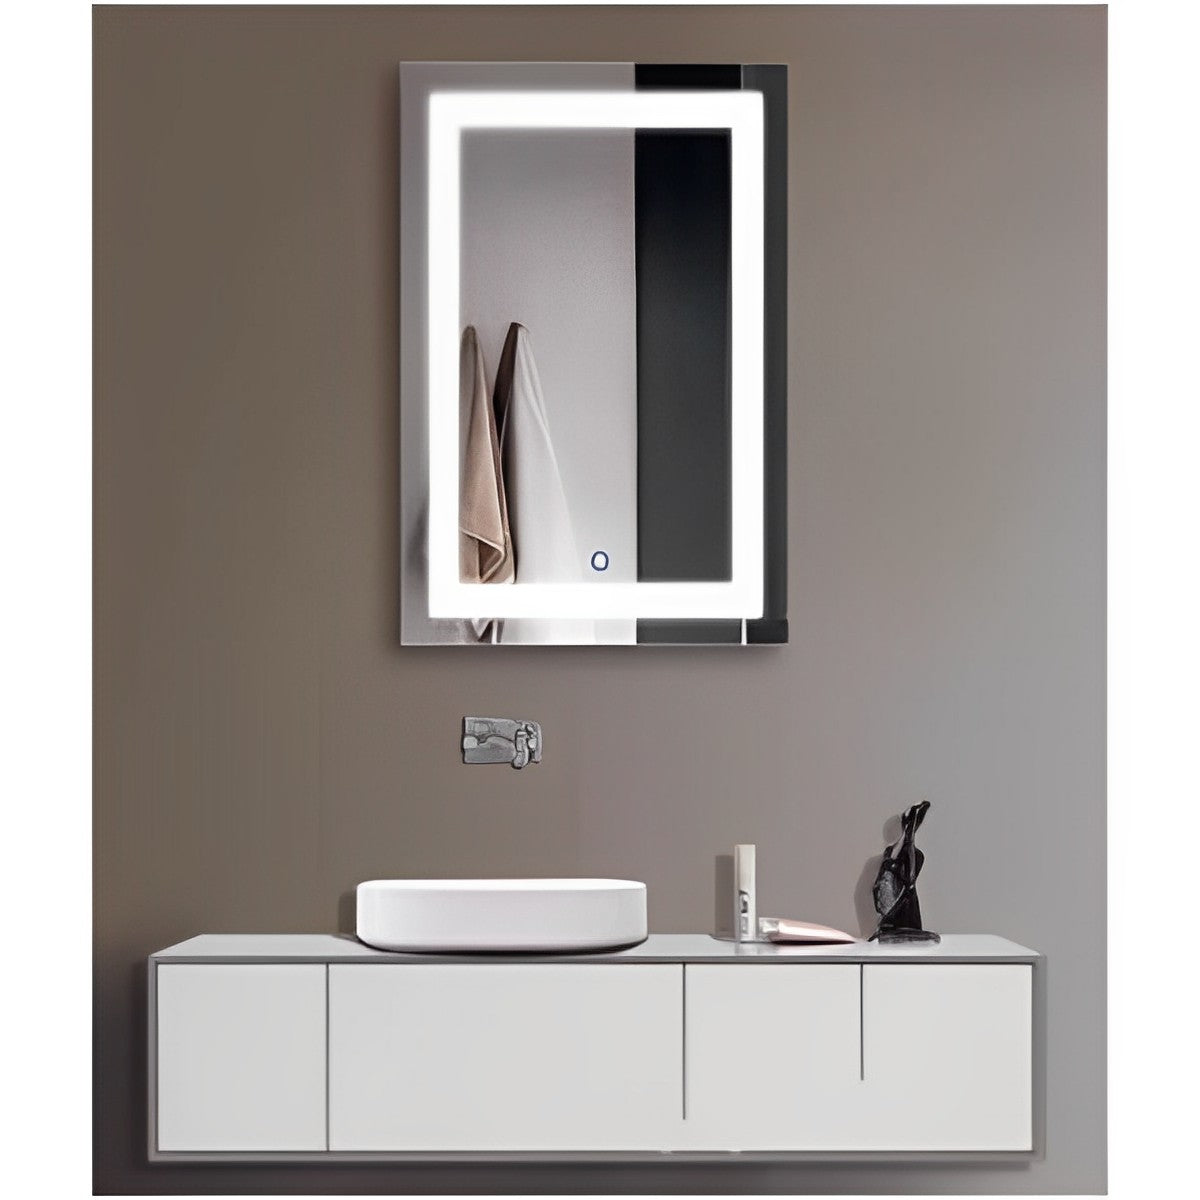 24" Vertical Hanging Mirror with LED Light and Bluetooth MSL-105 - RenoShop